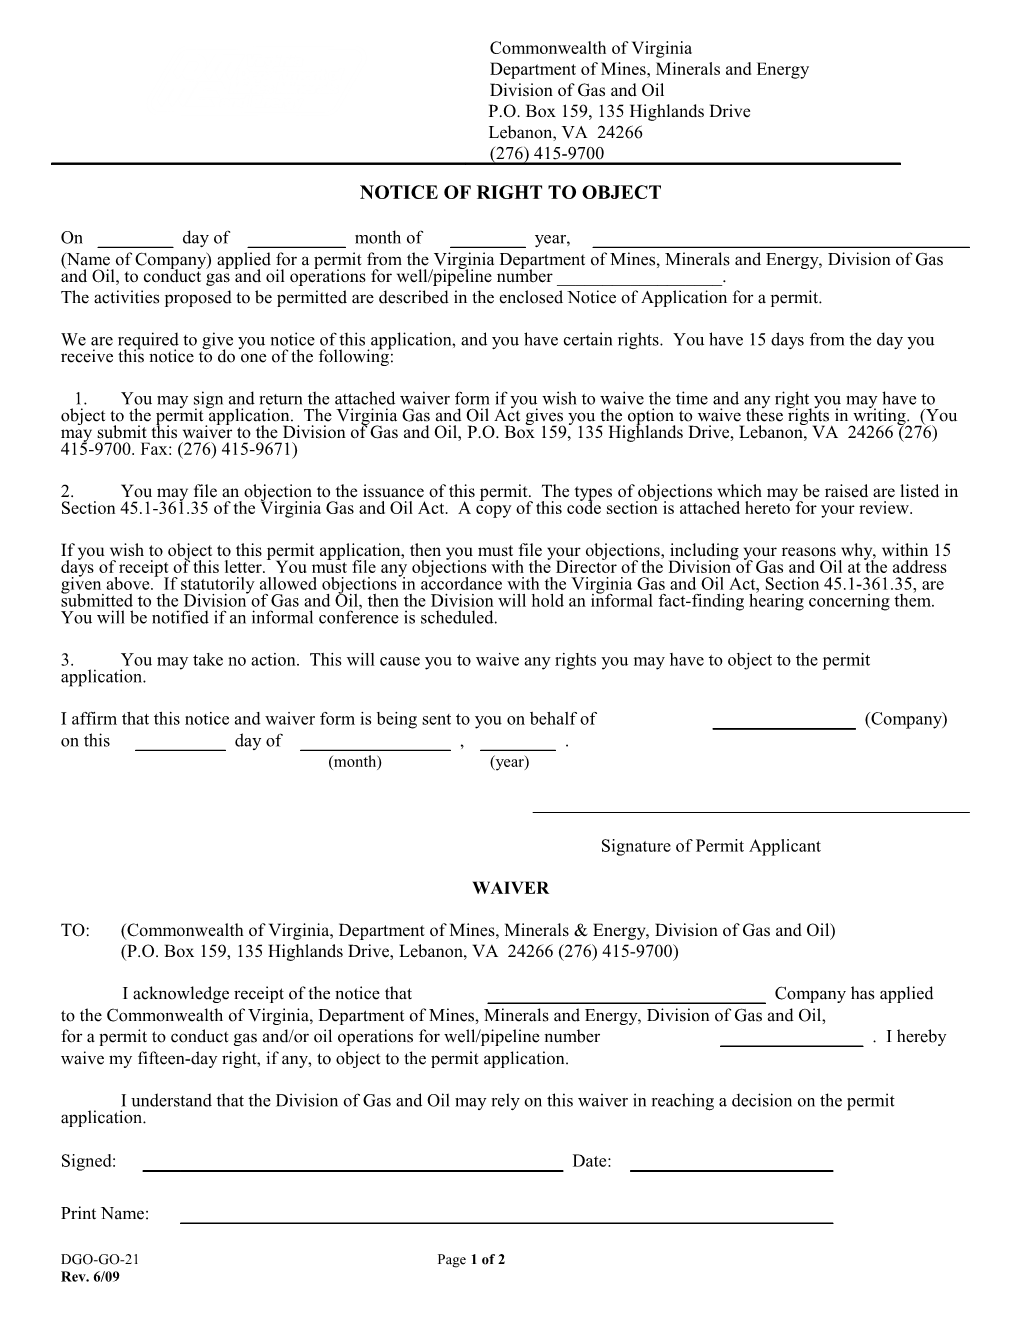 Notice of Right to Object